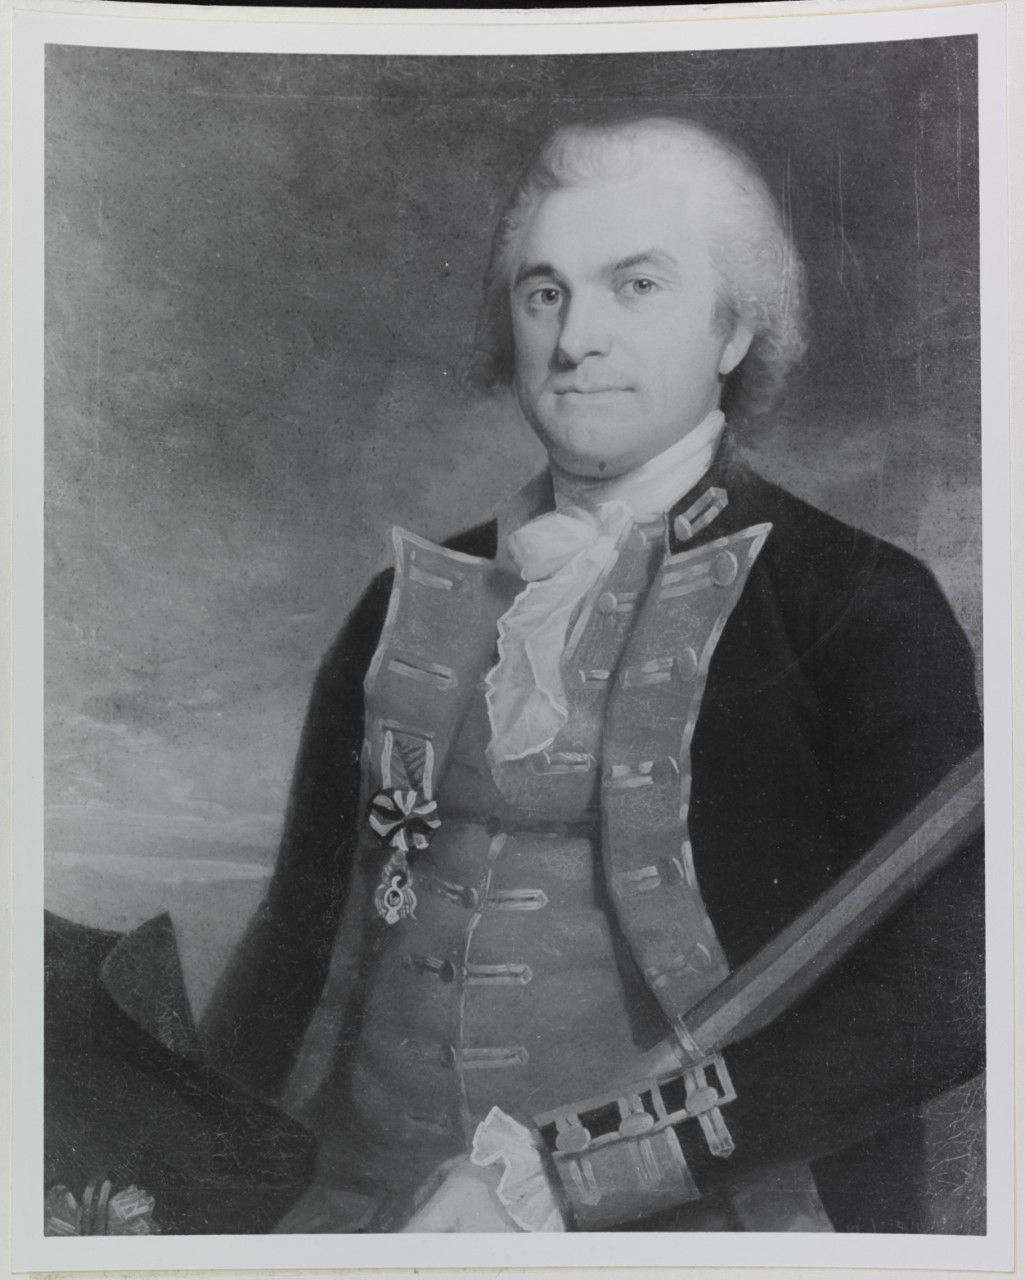 Silas Talbot, a portrait by Ralph Earl, courtesy of the National Portrait Gallery